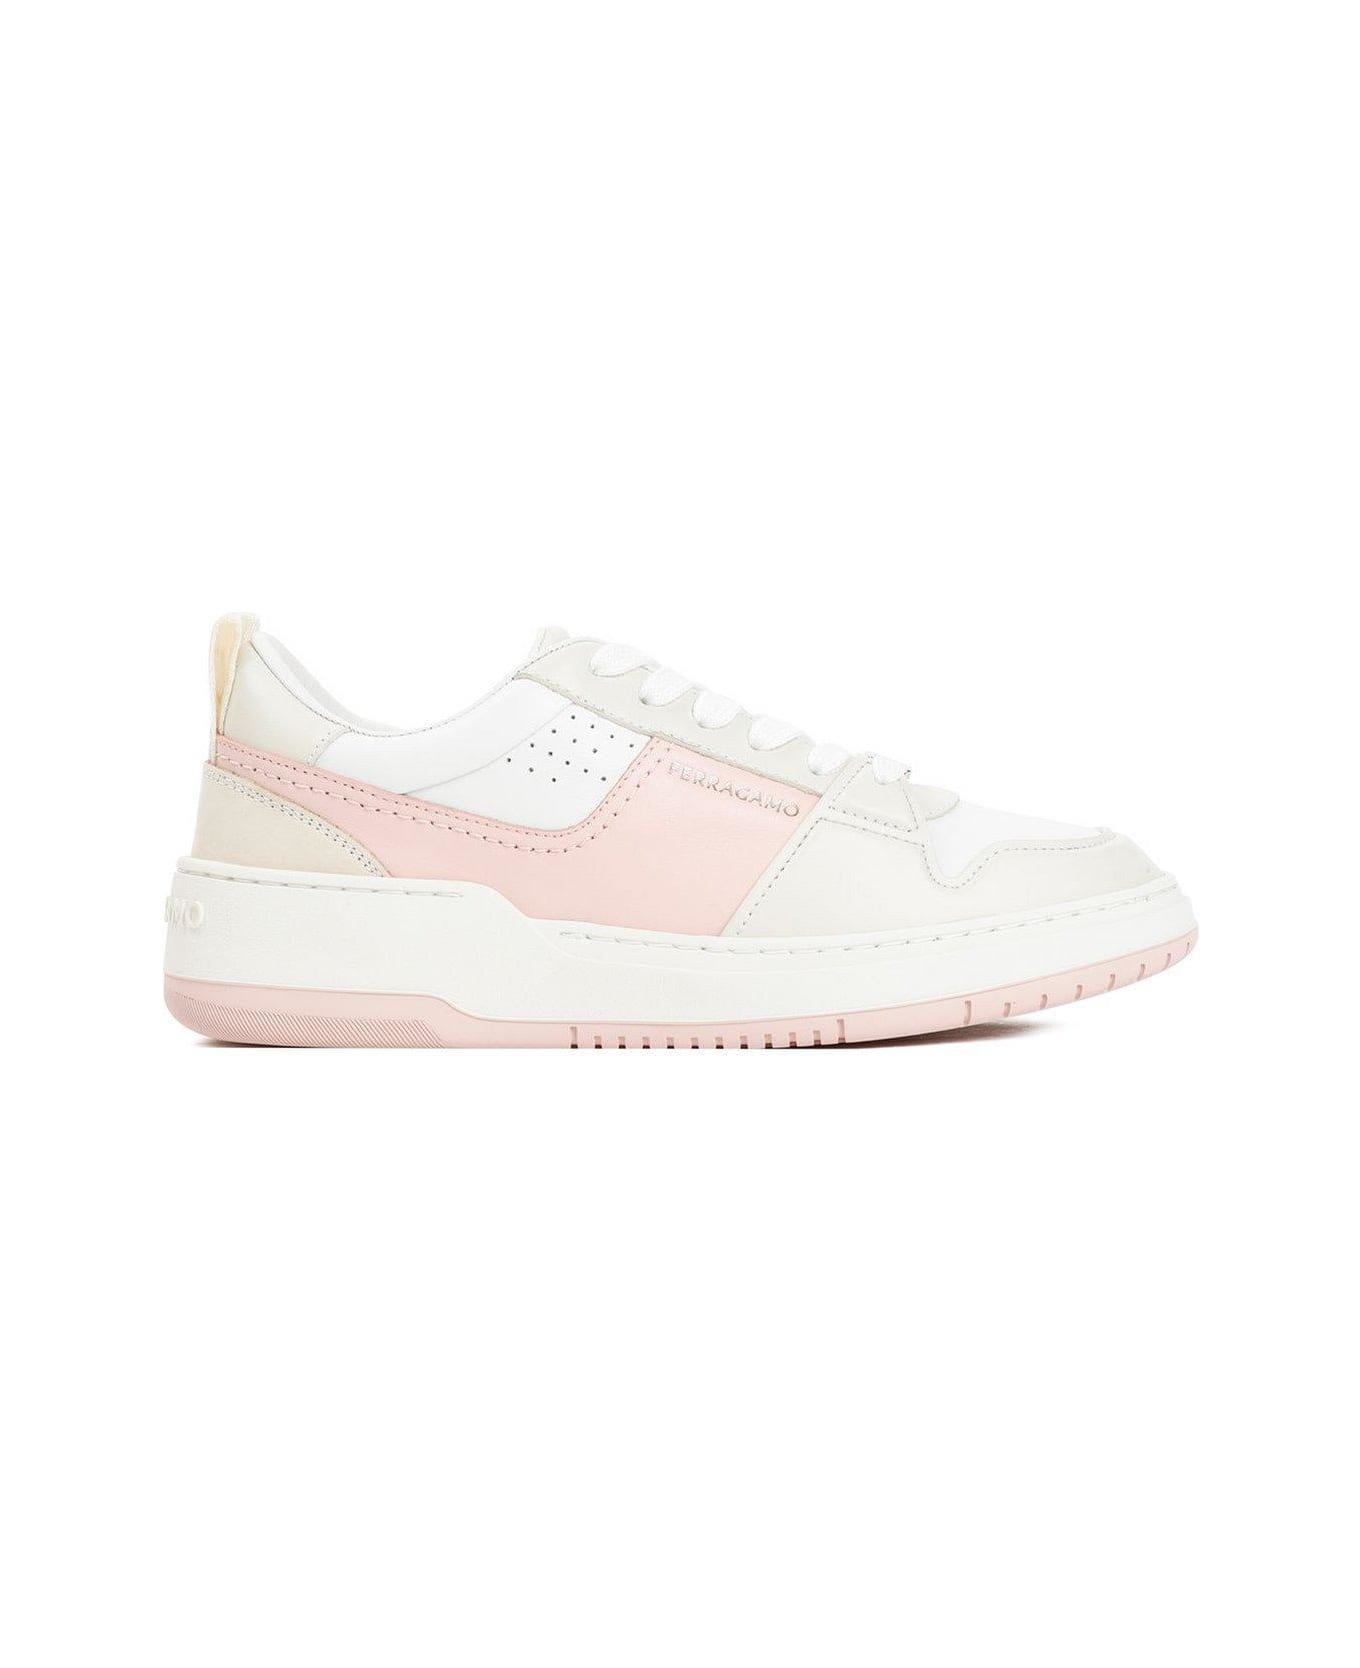 Ferragamo Logo Printed Lace-up Sneakers - PINK/WHITE